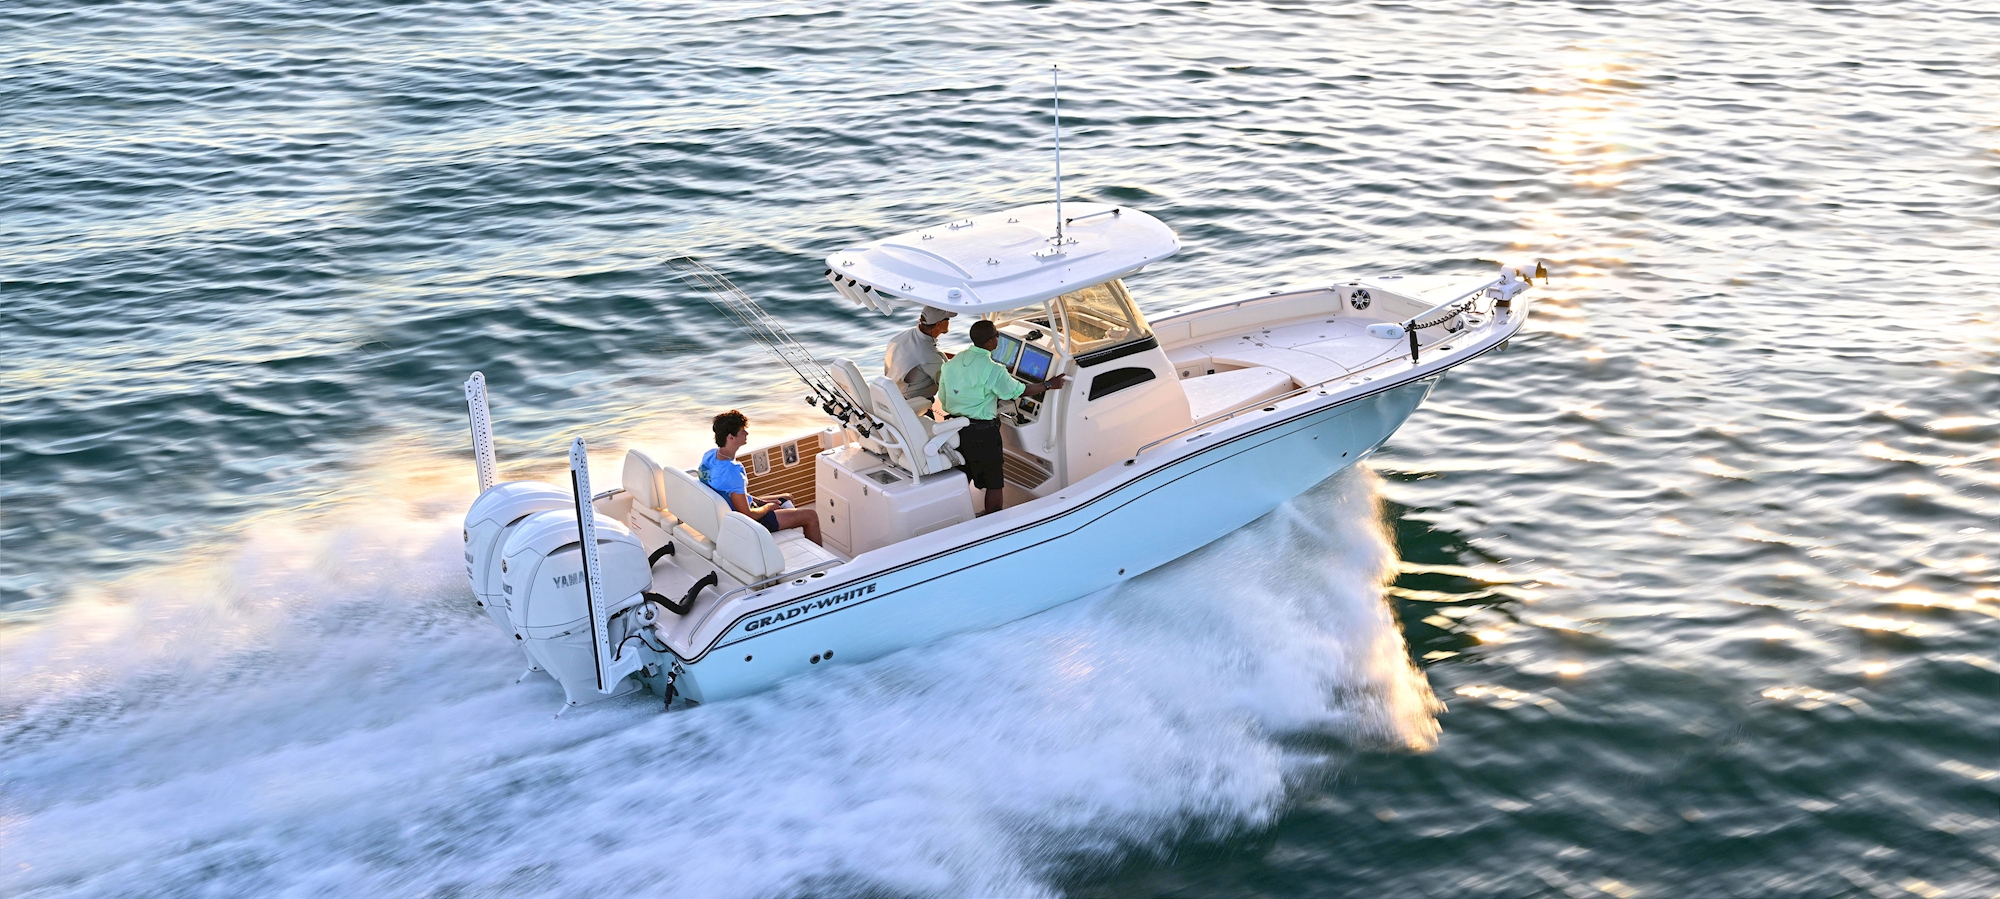 Grady-White 281 CE 28-foot Coastal Explorer boat running on the water with three people aboard